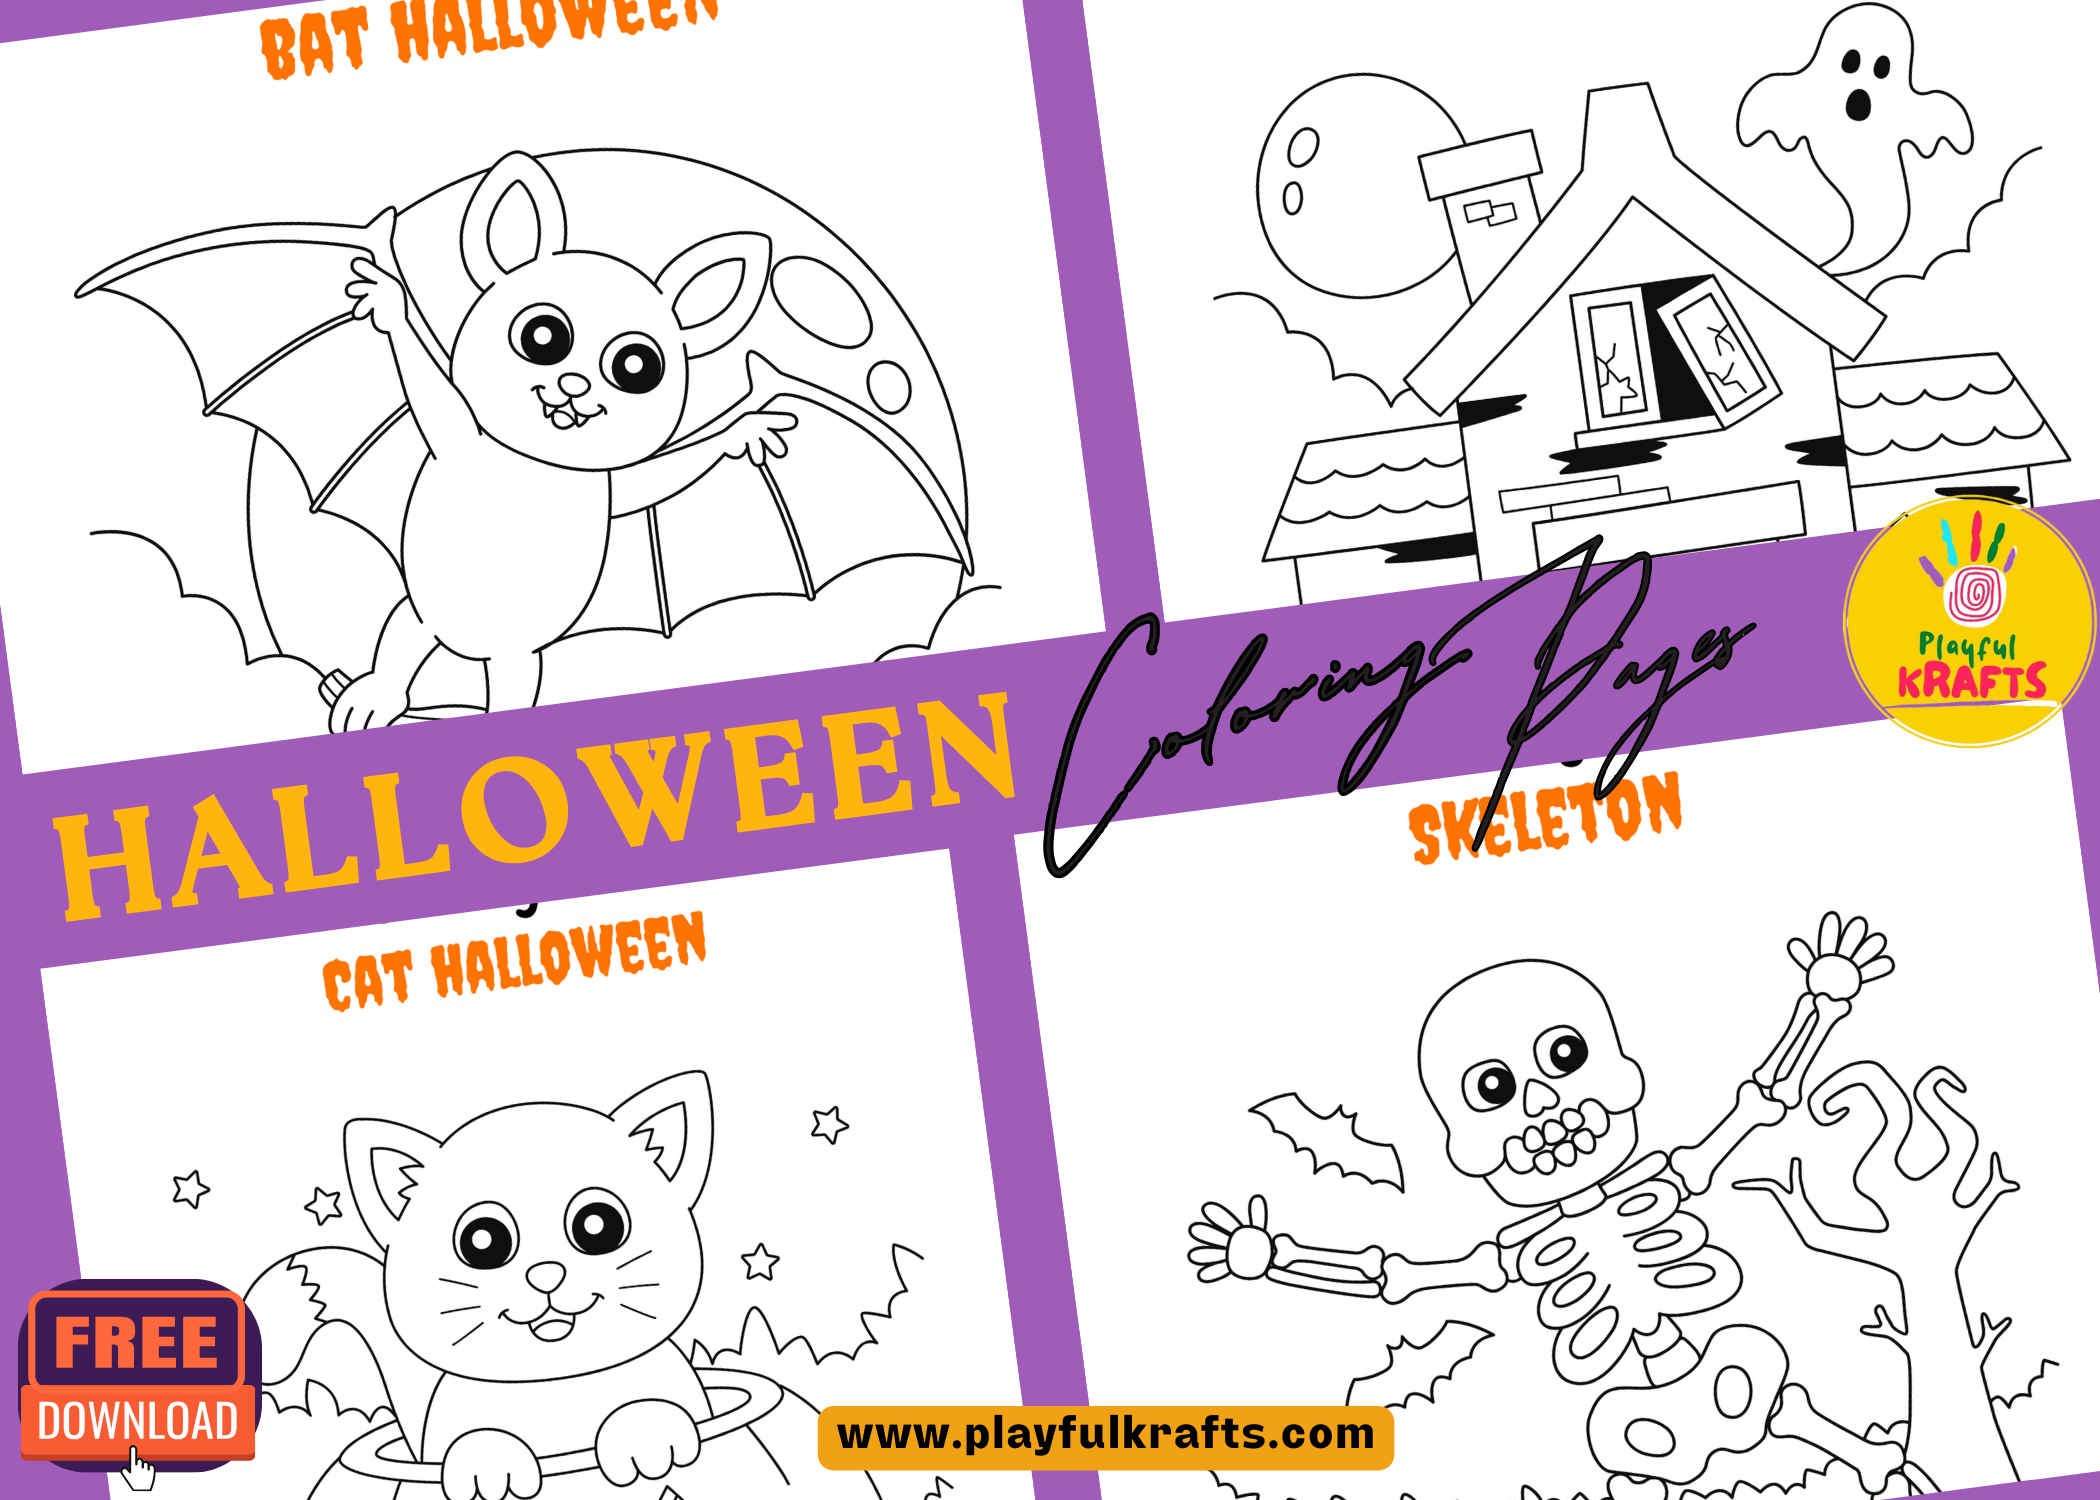 Halloween-coloring-free-download-for-kids